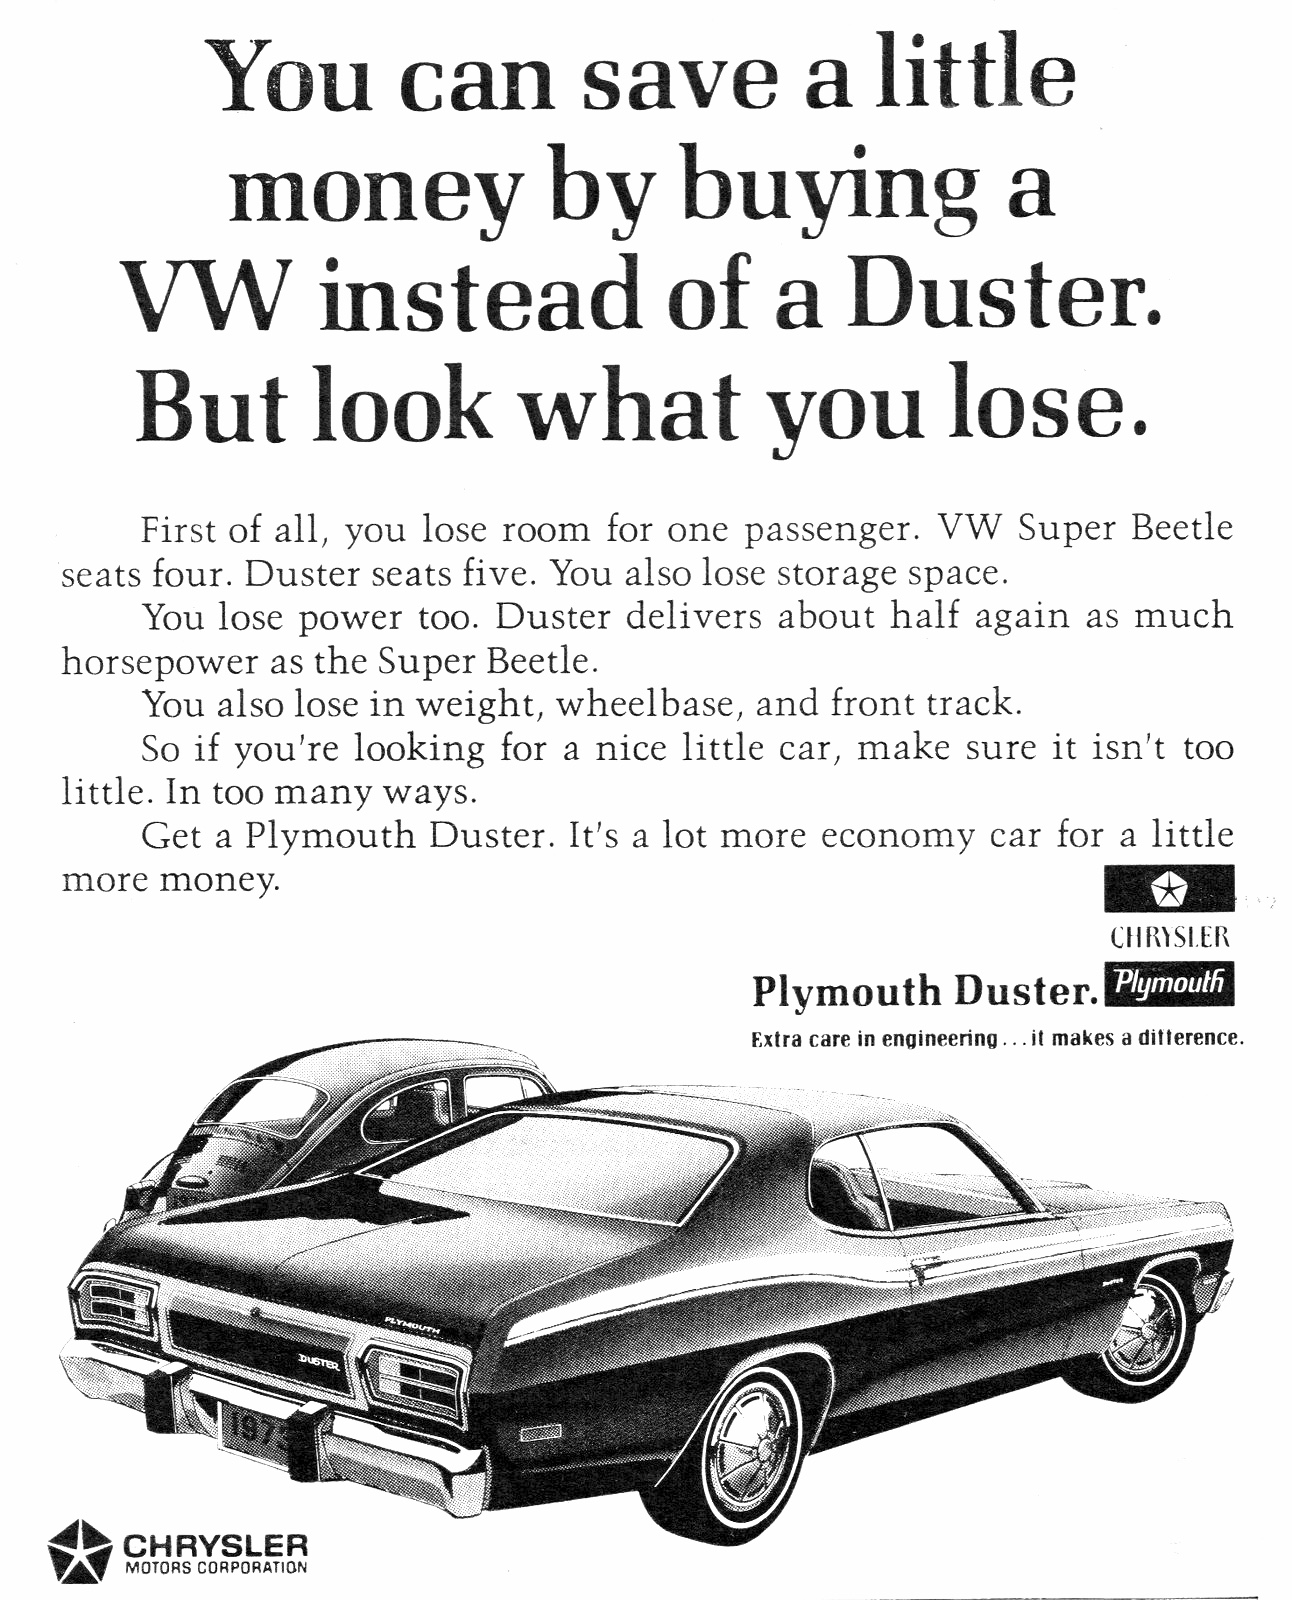 1973 Plymouth Duster (VW)